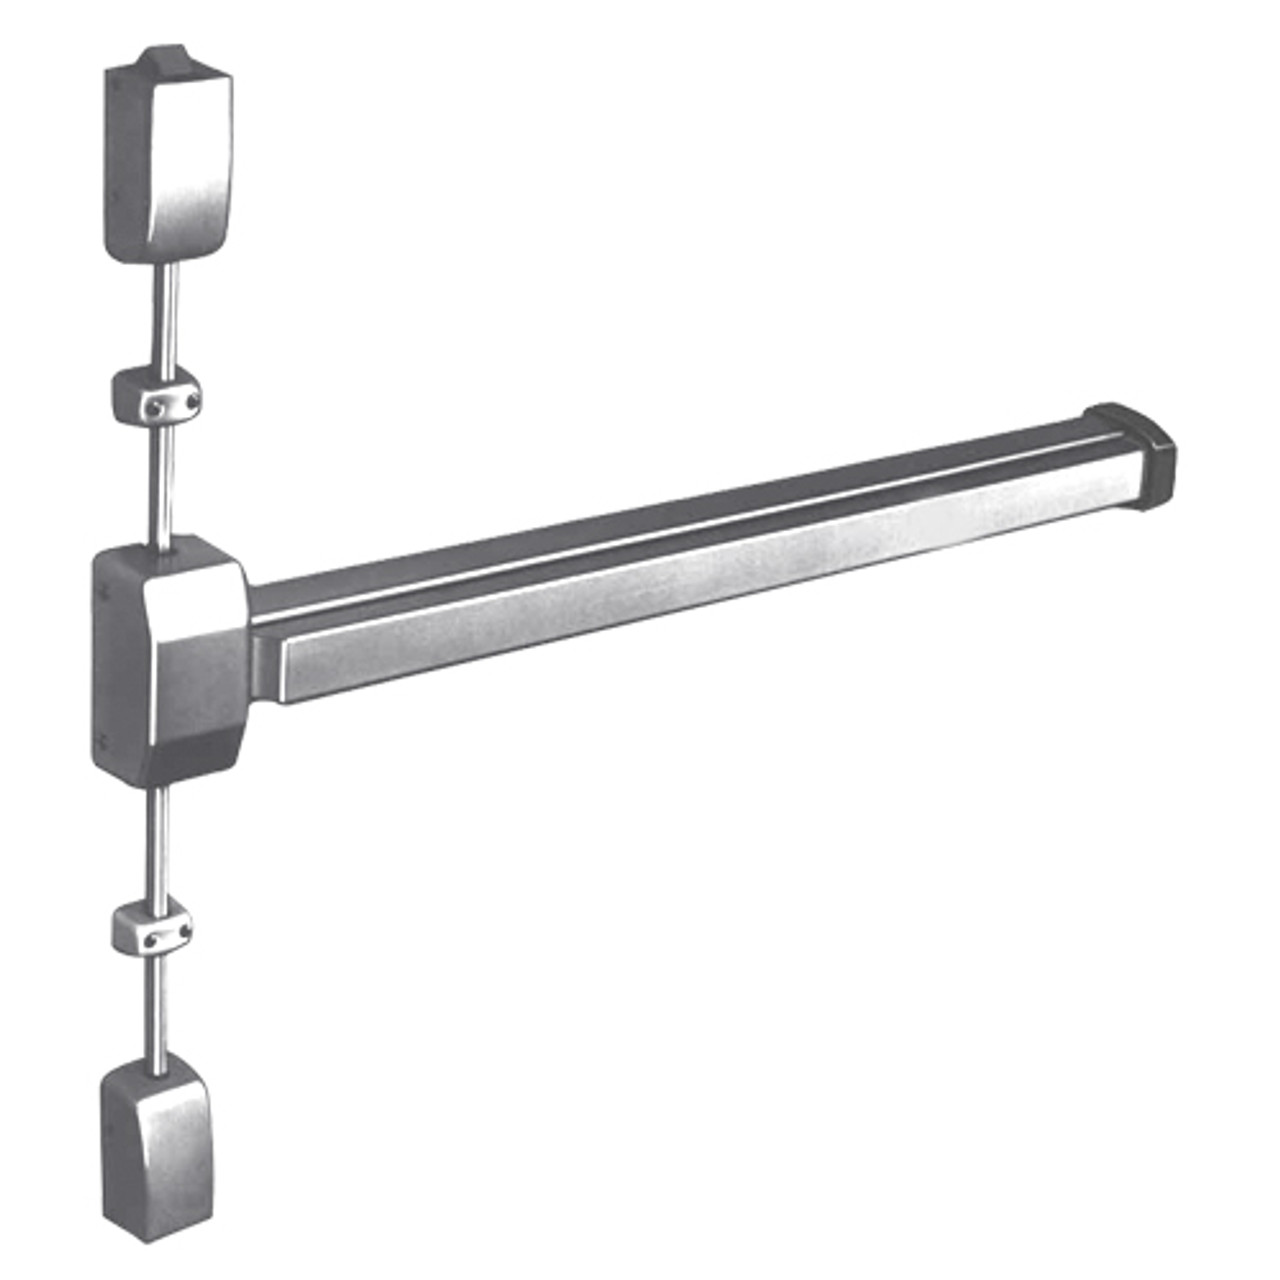 12-2727G-EN Sargent 20 Series Reversible Fire Rated Vertical Rod Exit Device in Sprayed Aluminum